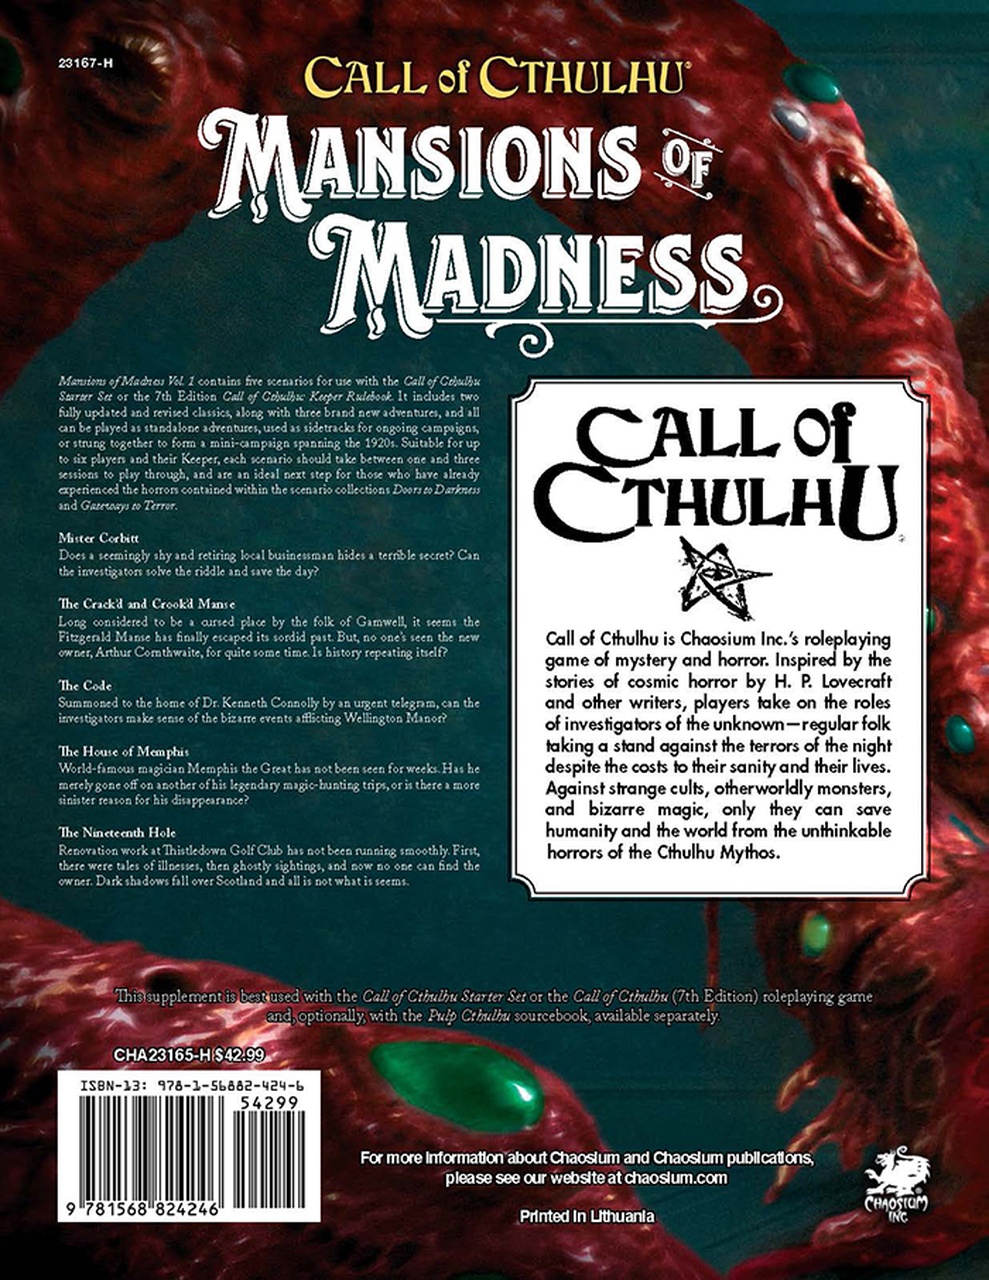 Call of Cthulhu Mansions of Madness: Vol 1 - Behind Closed Doors-1648714185.jpg